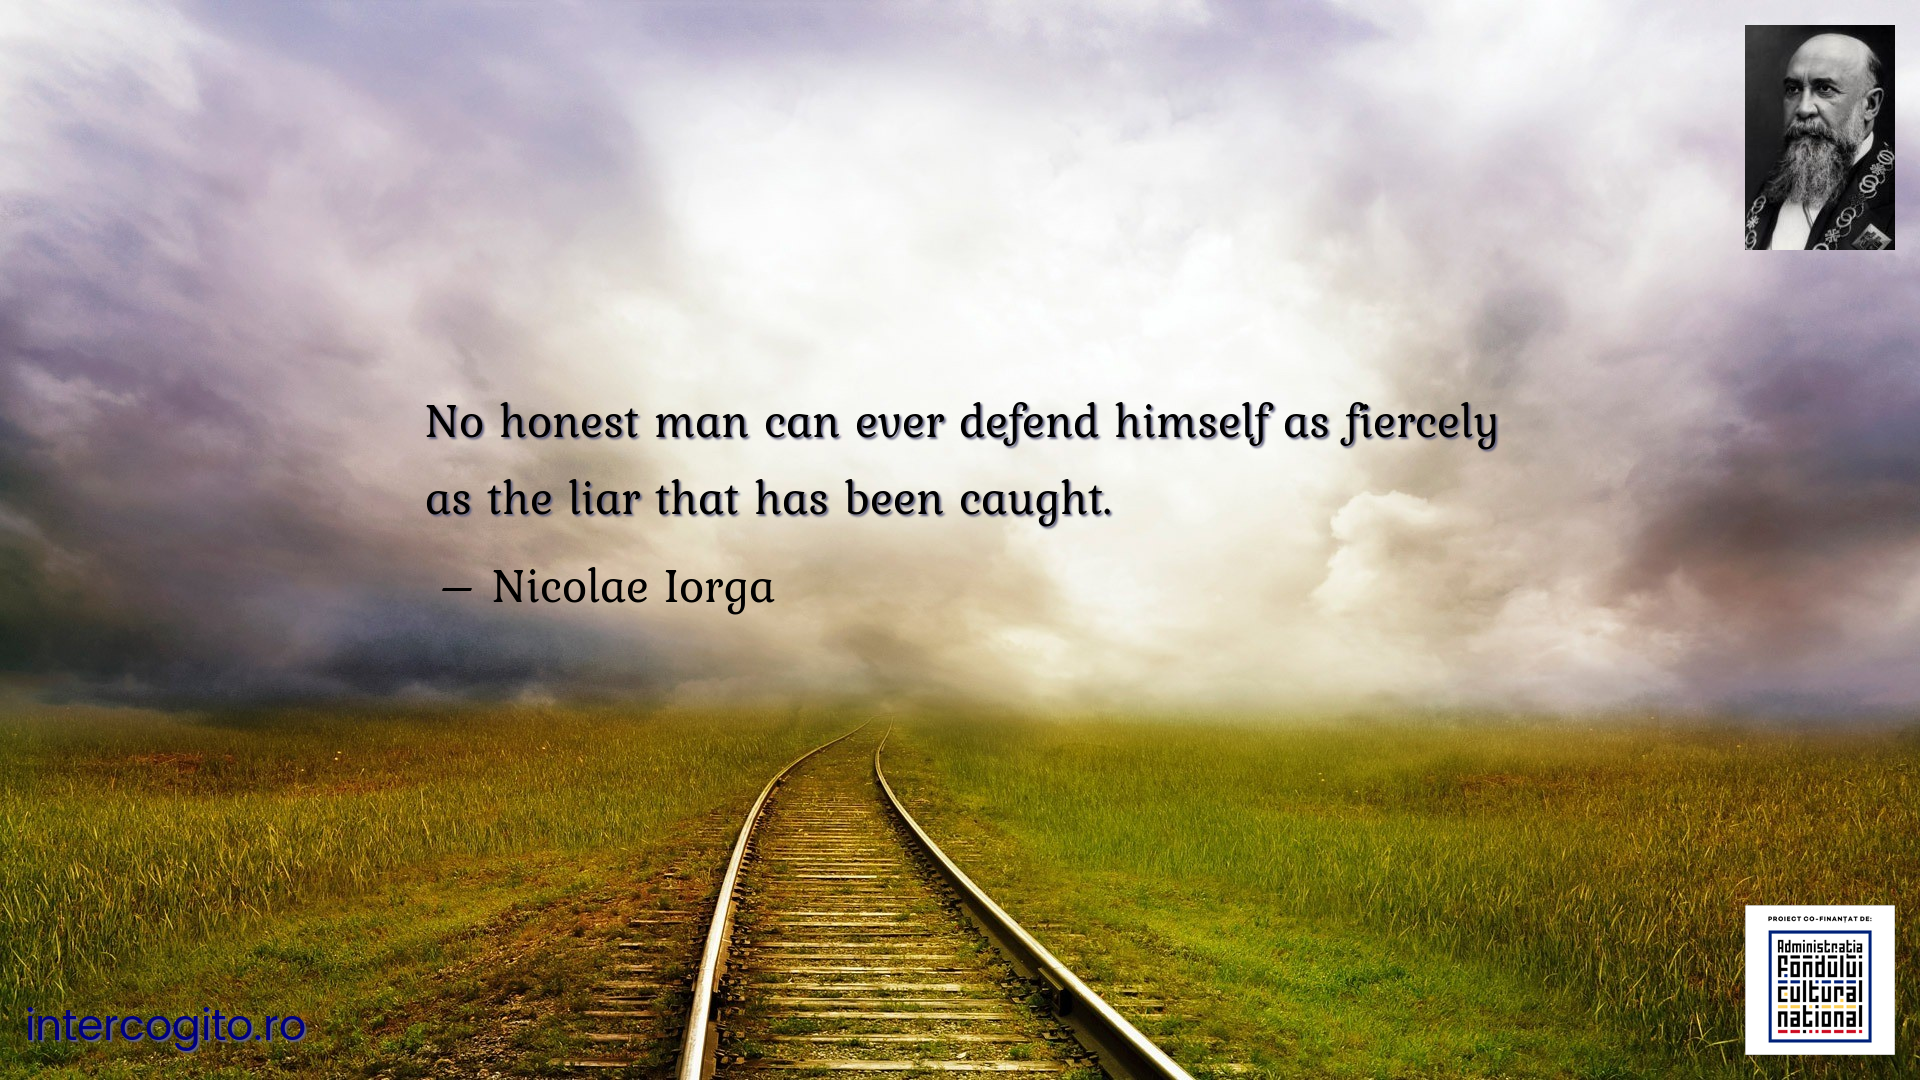 No honest man can ever defend himself as fiercely as the liar that has been caught.